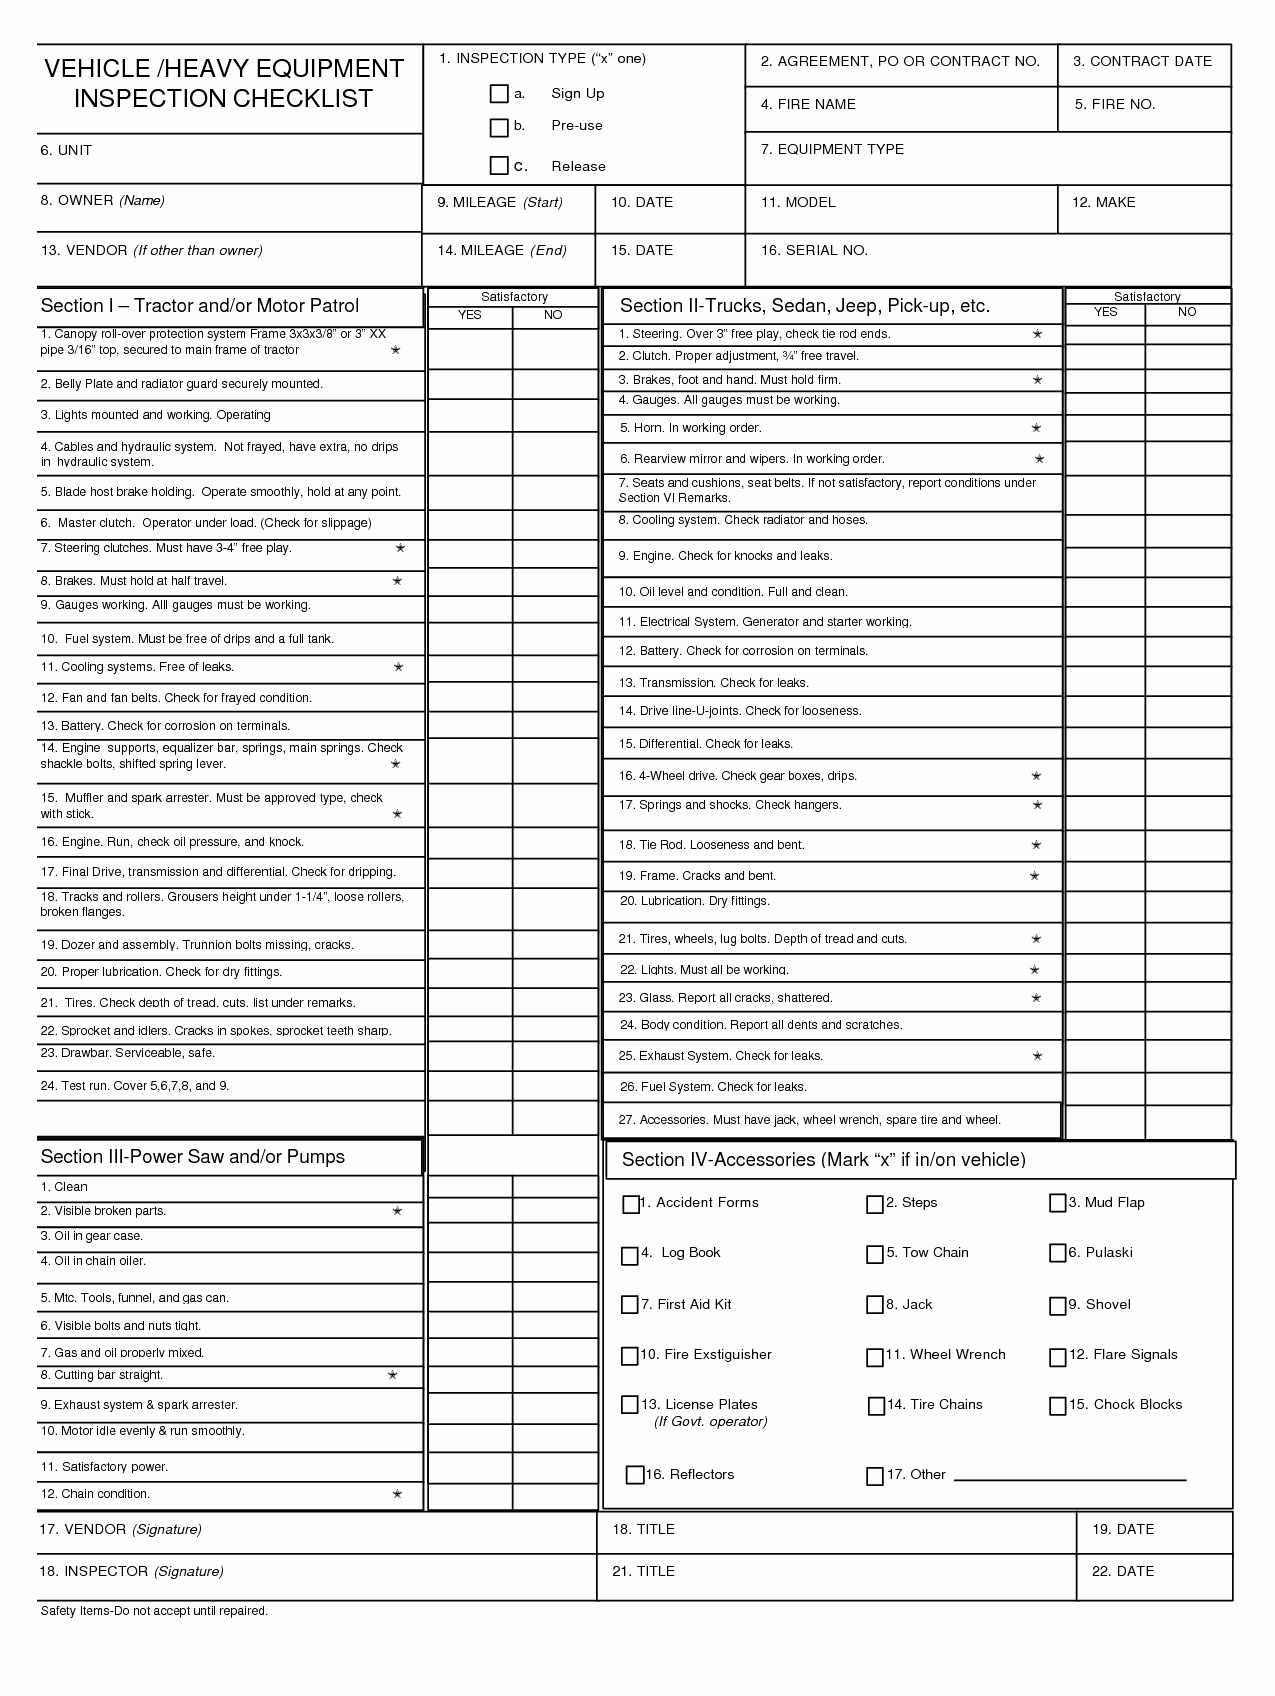 Vehicle Safety Inspection Checklist Template Fresh Best S Of Equipment Inspection Checklist Template Heavy Equipment Inspection Checklist